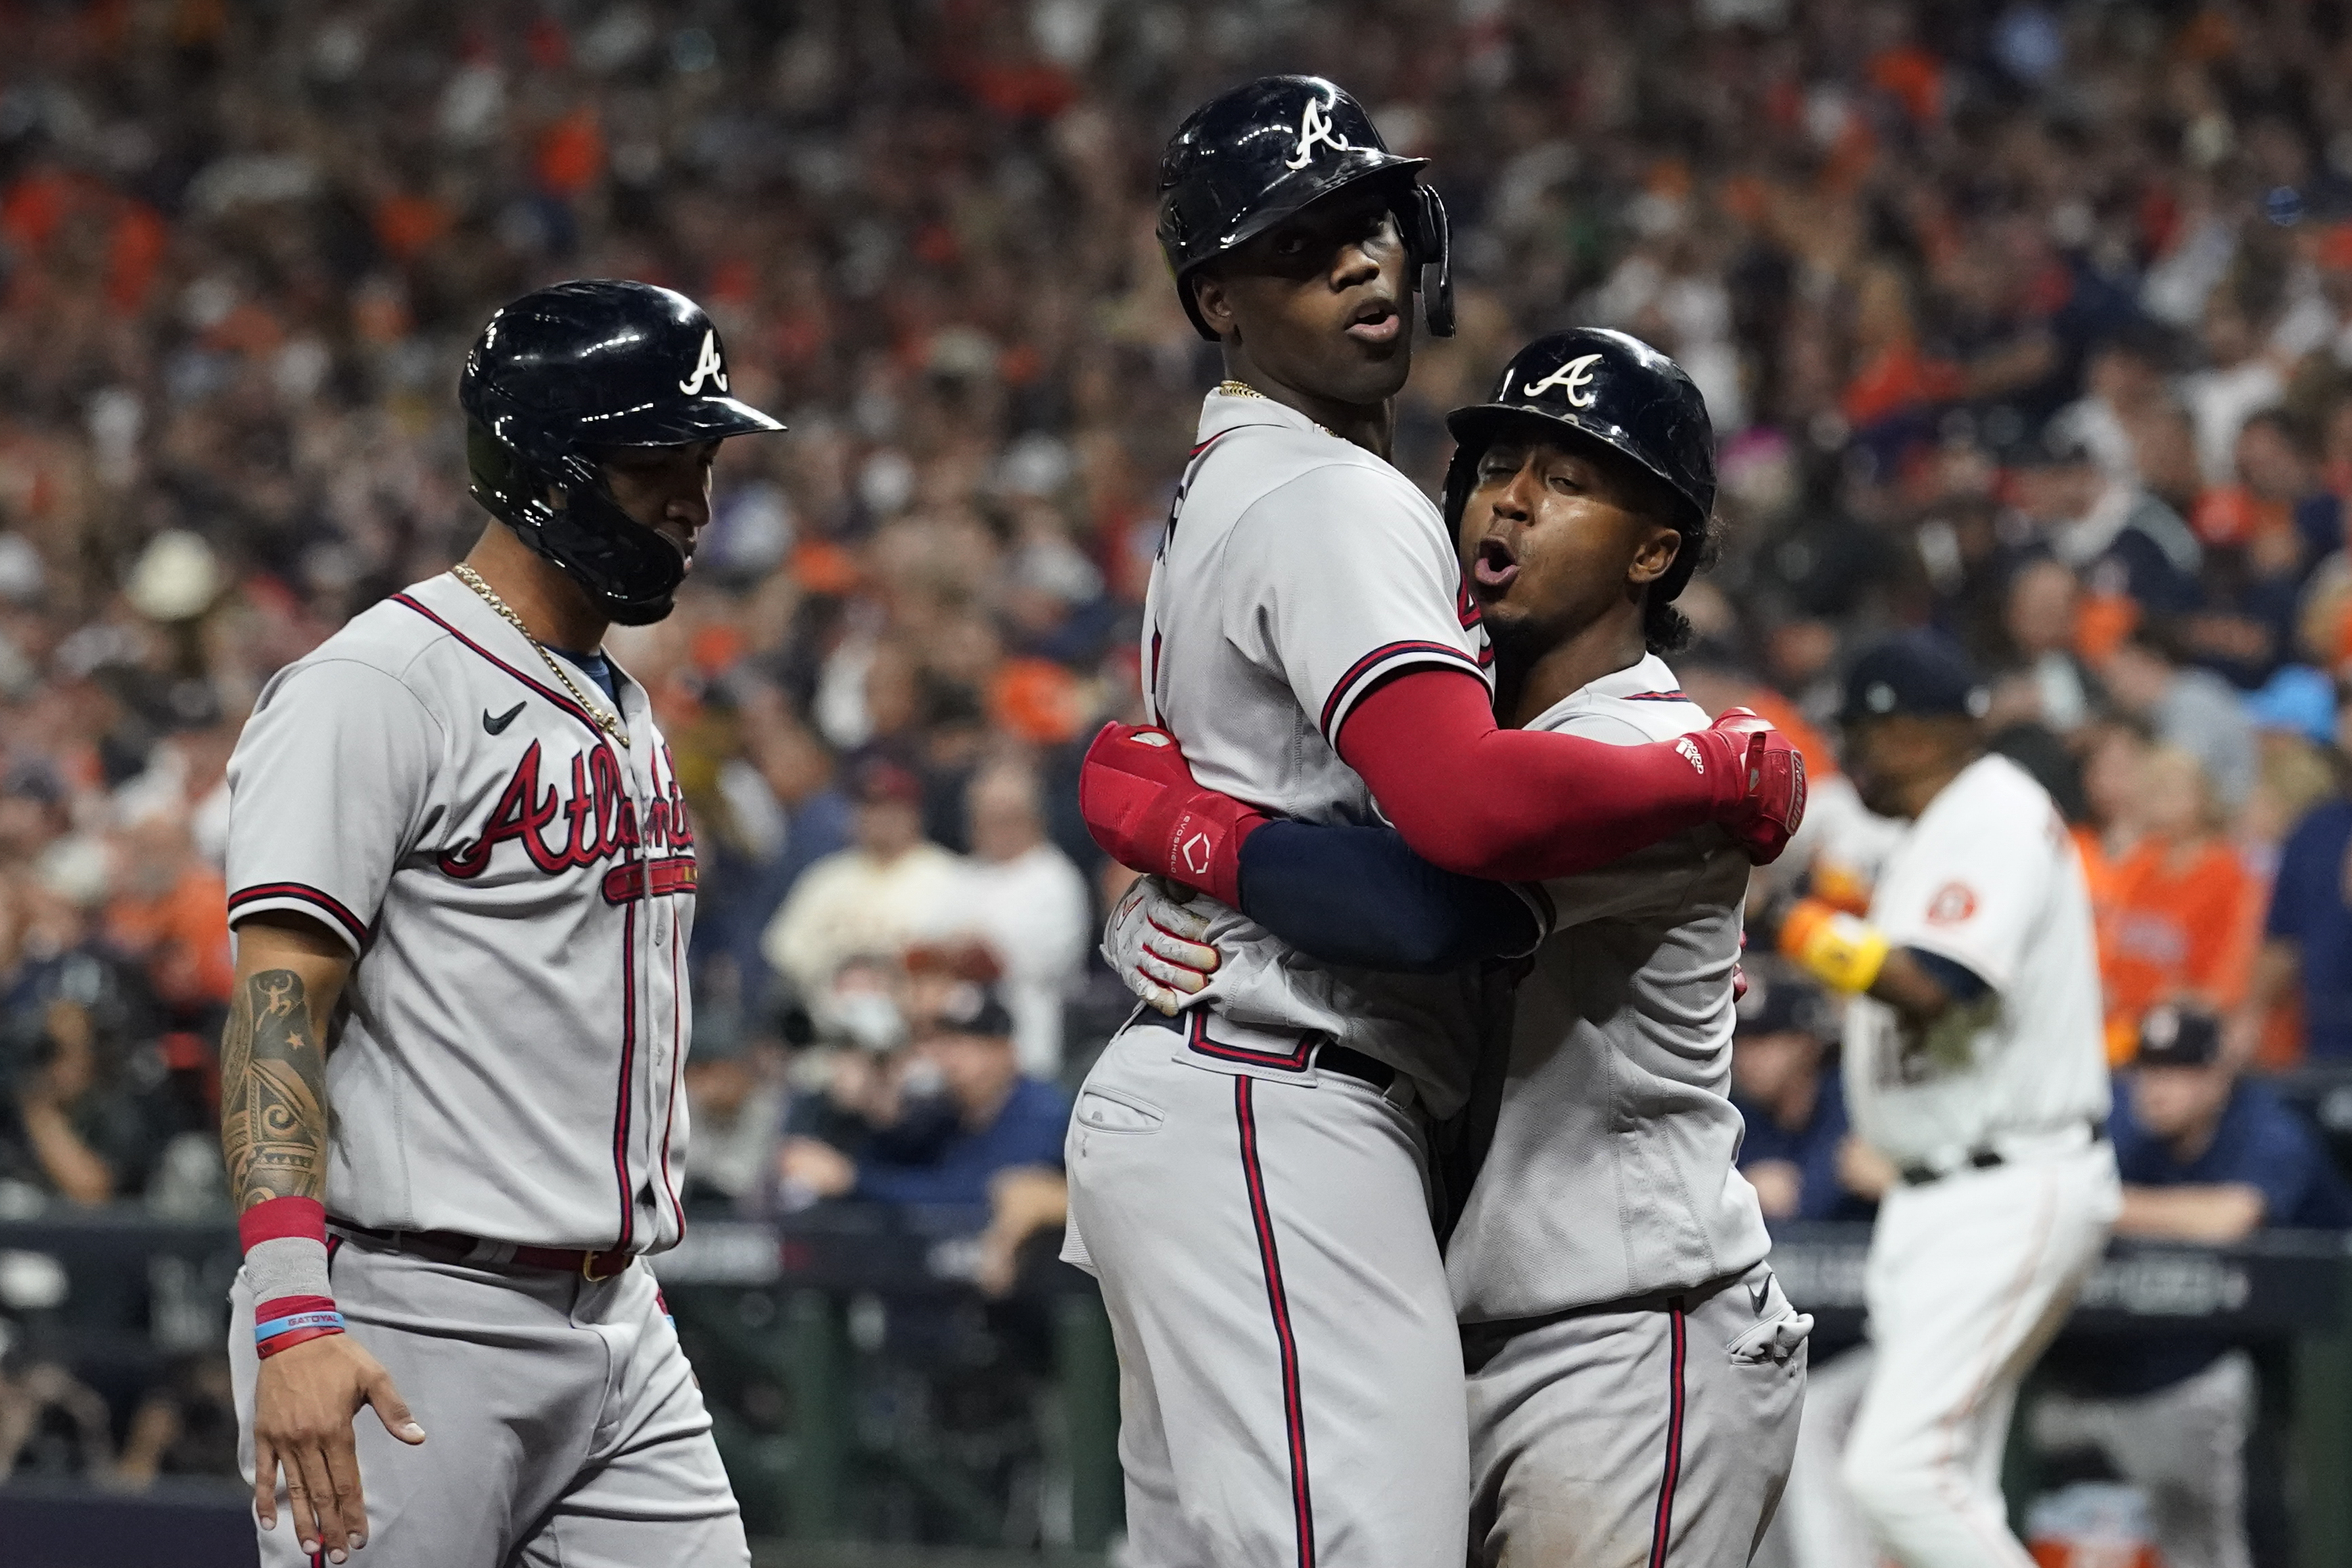 Braves Jorge Soler 1st batter to lead off World Series with HR